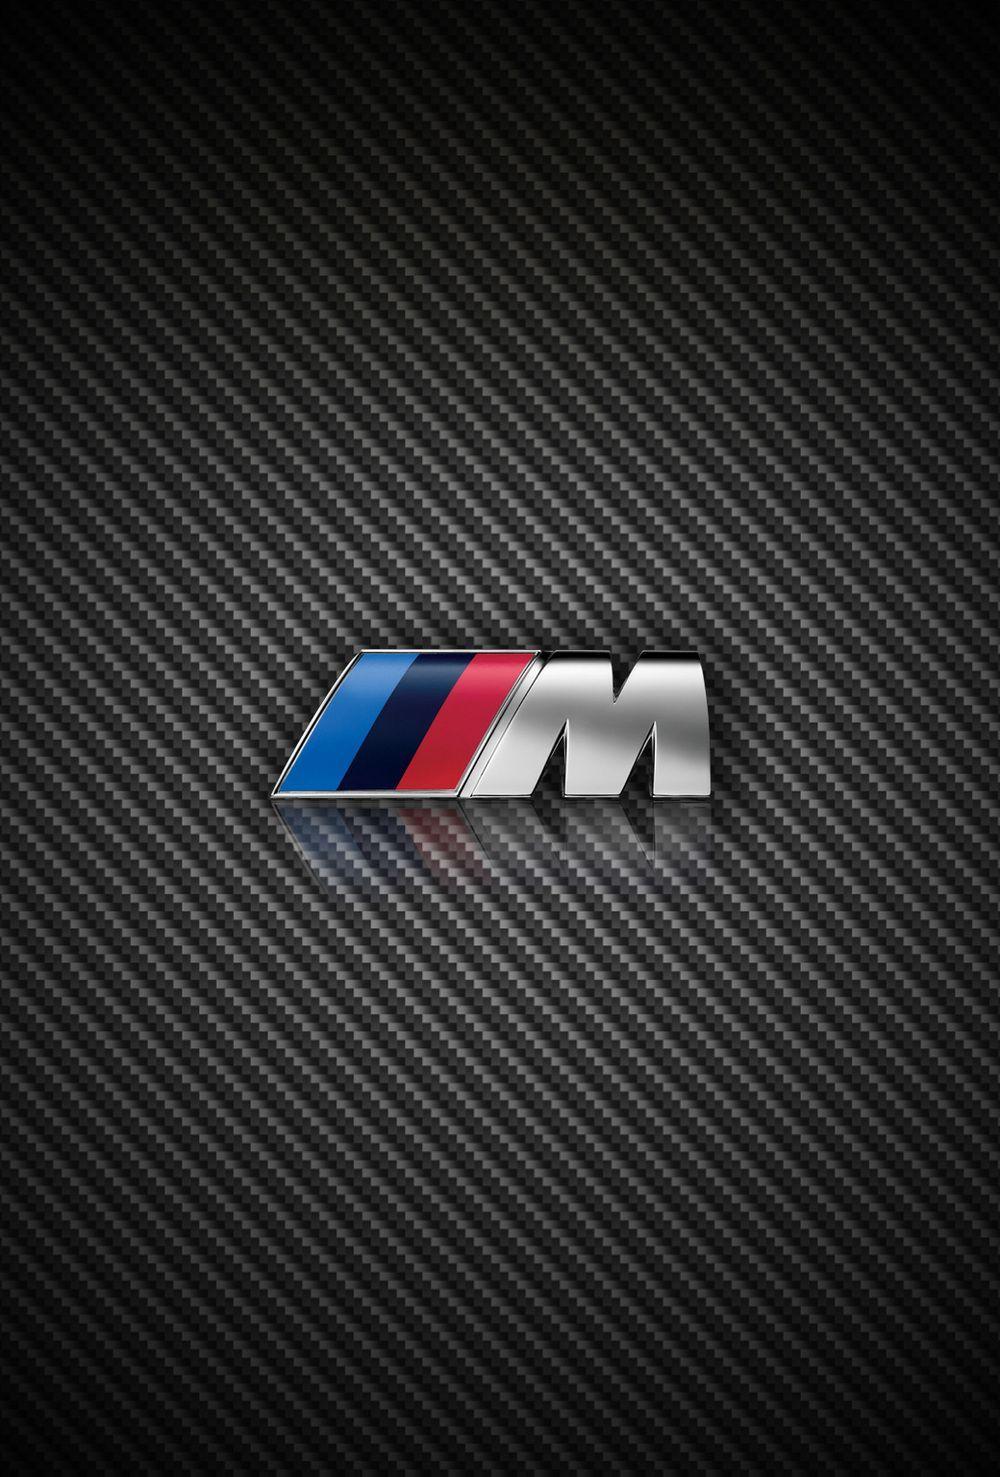 Logos For > Bmw M Logo Wallpapers Iphone